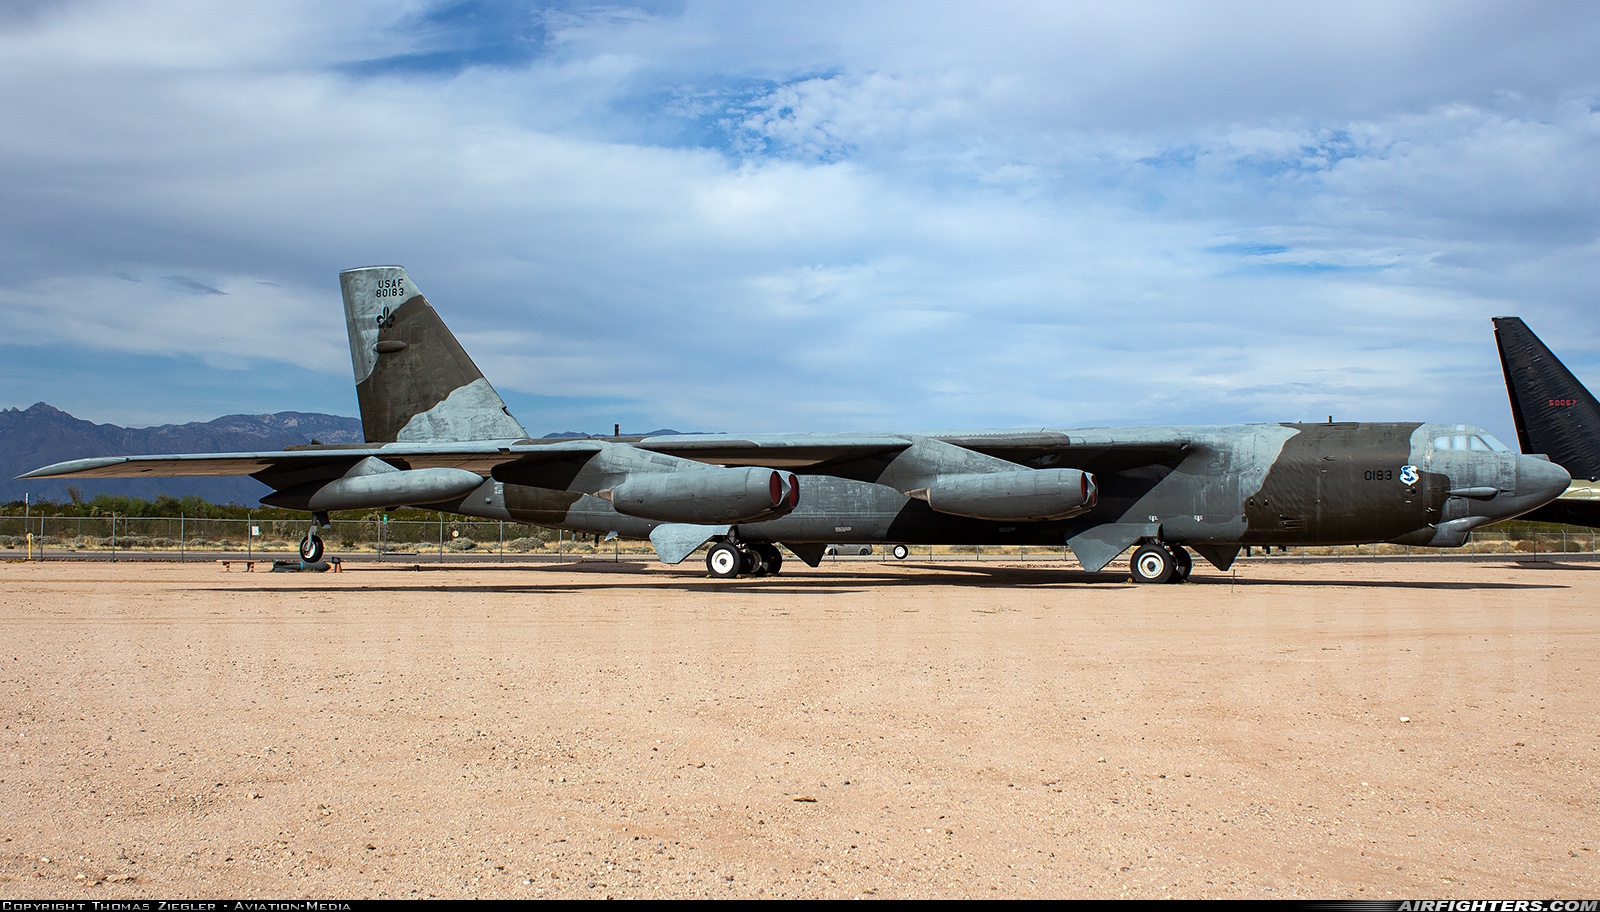 USA - Air Force Boeing B-52G Stratofortress 58-0183 at Tucson - Pima Air and Space Museum, USA